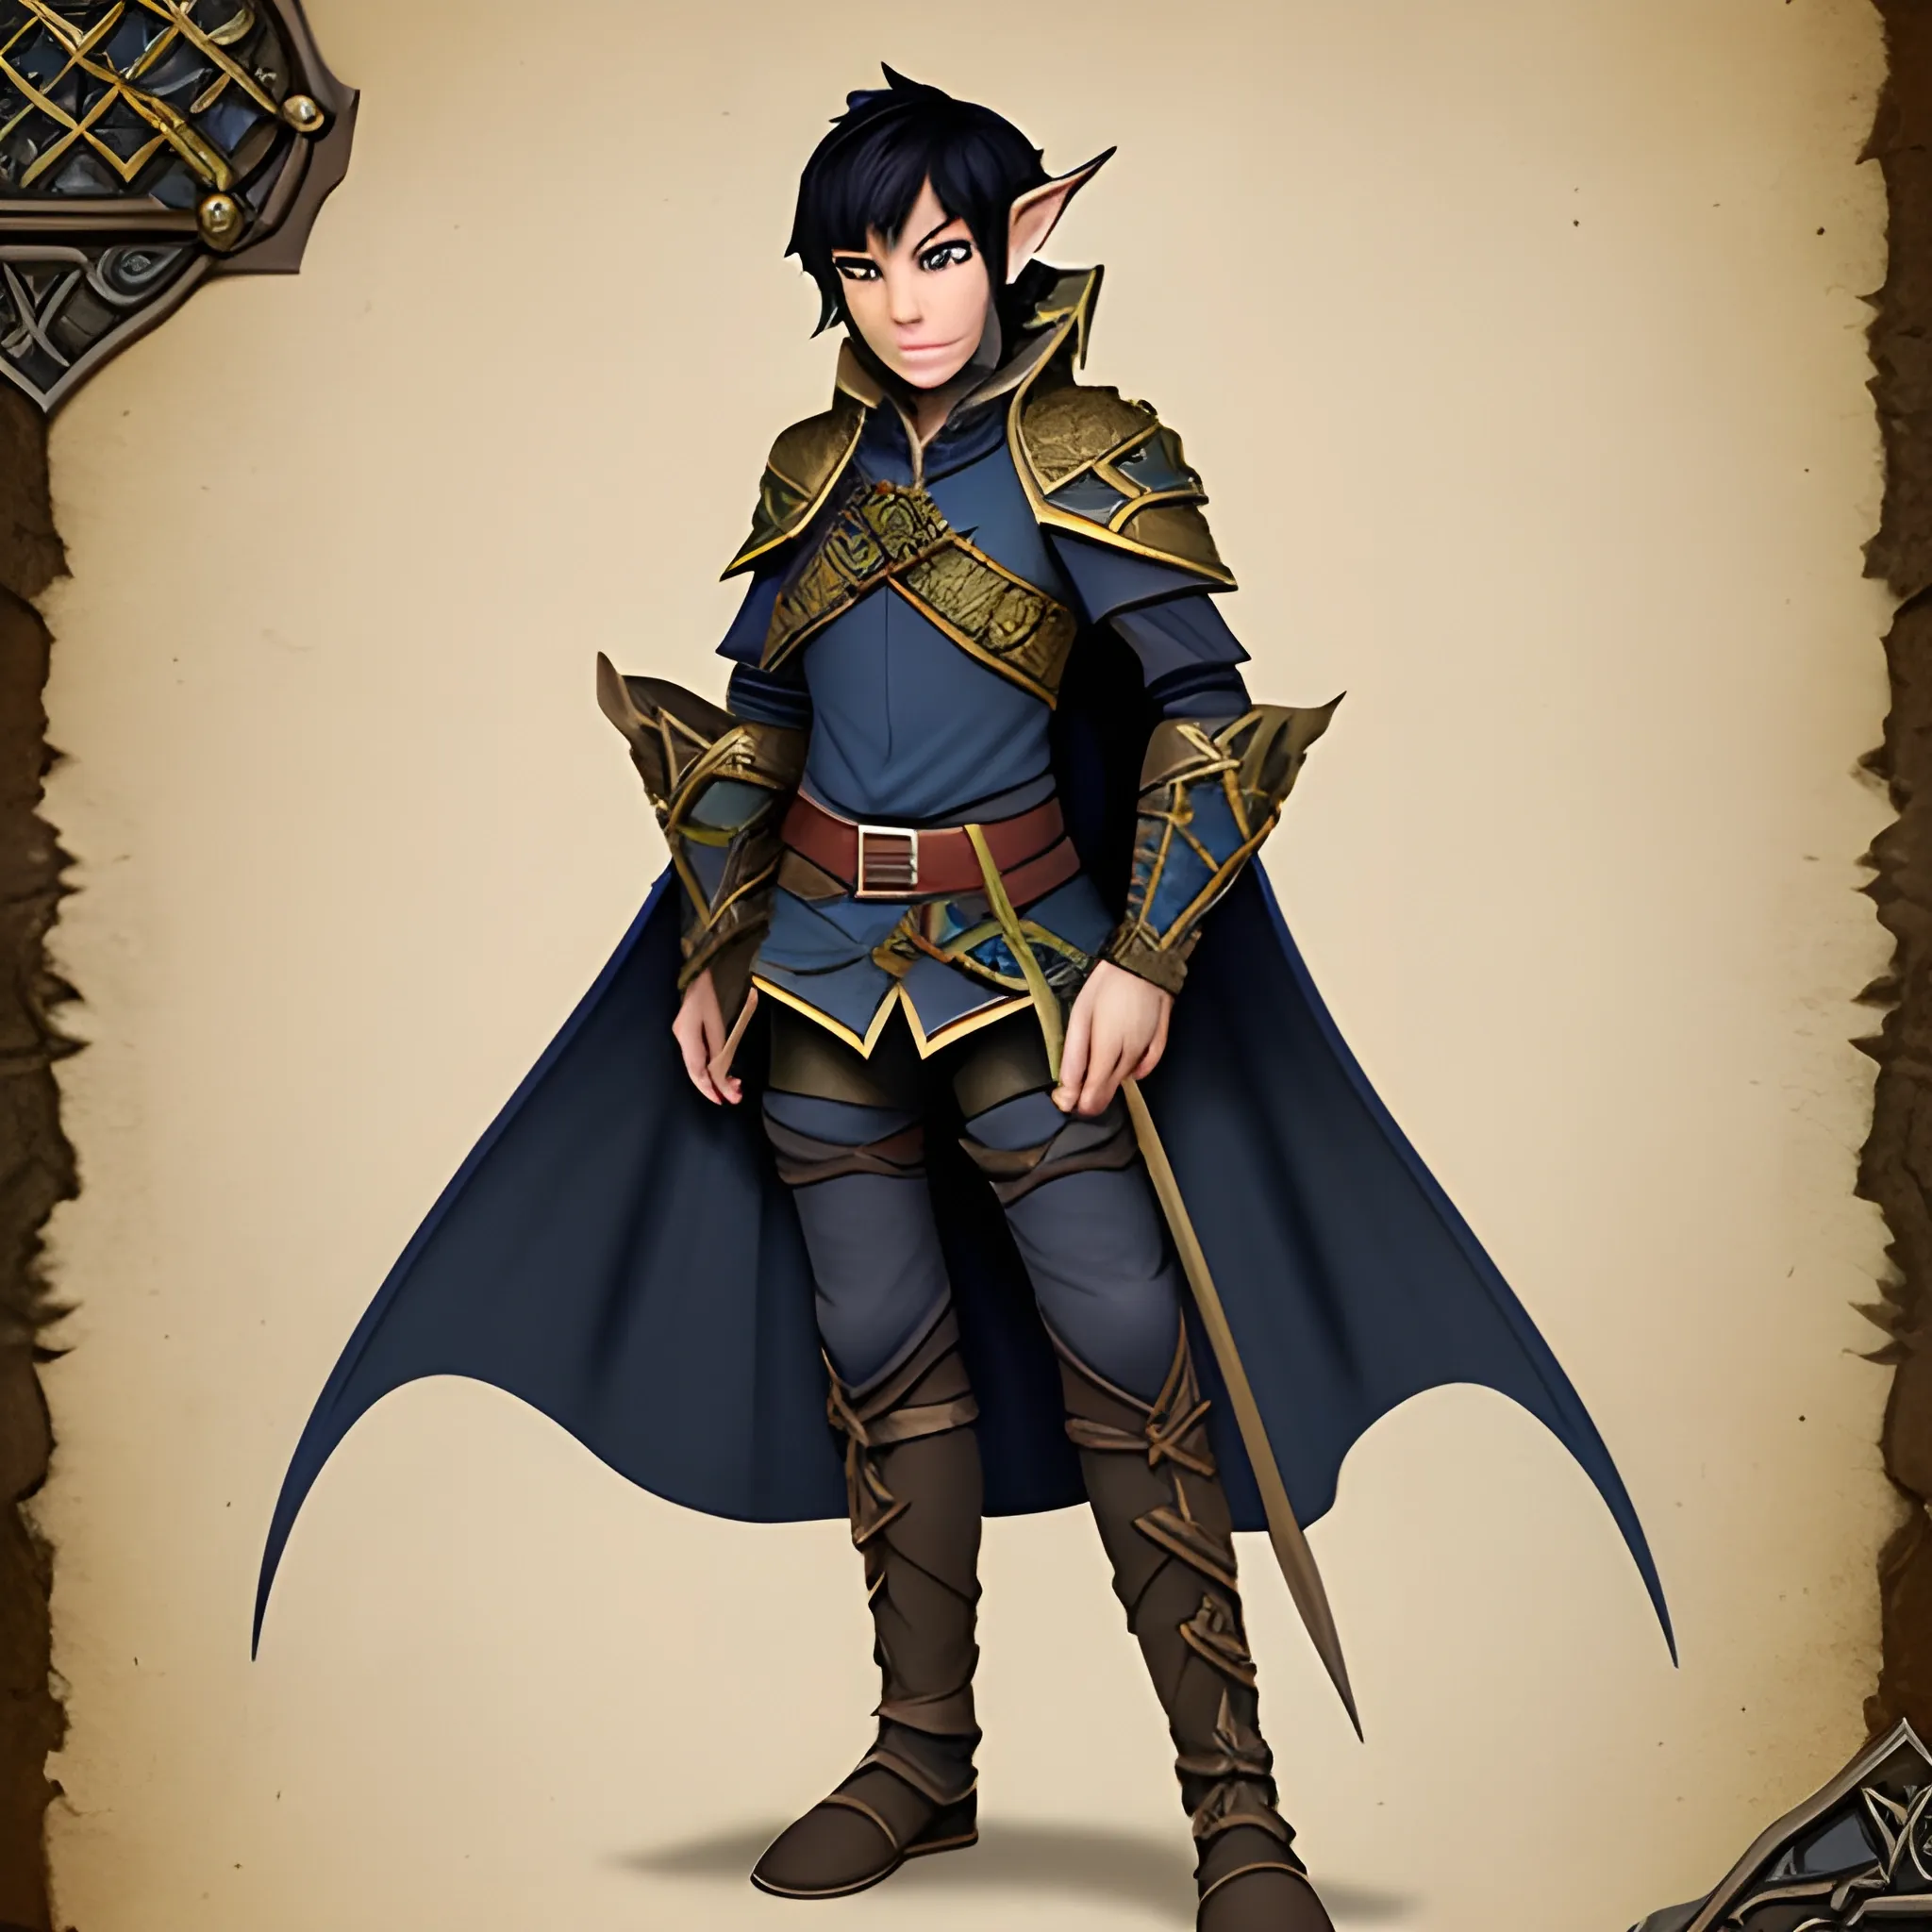 A Dungeons and Dragons elf, complete view of him, it has black hair, wears a dark blue tunic with gold details, has two horsetails